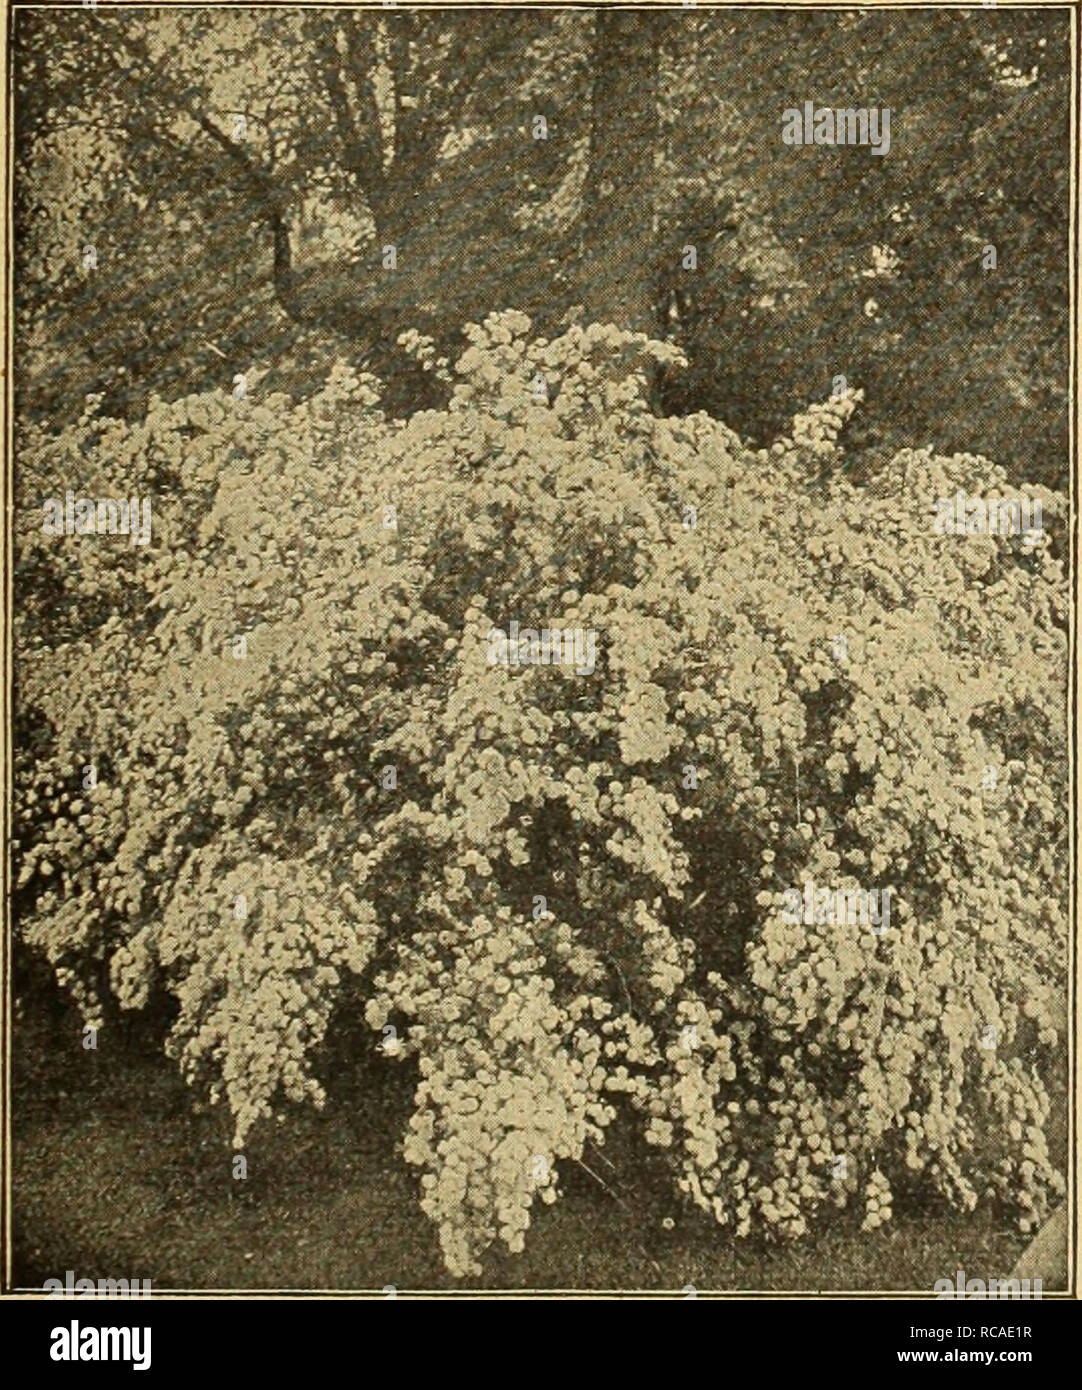 . Dreer's autumn catalogue 1926. Bulbs (Plants) Catalogs; Flowers Seeds Catalogs; Gardening Equipment and supplies Catalogs; Nurseries (Horticulture) Catalogs; Vegetables Seeds Catalogs. Philadelphus Coronarius. Spiraea Van Houttei Rhodotypus Kerrioides {White Kerria). A very ornamental Japanese Shrub of medium size, which succeeds well in sun or shade, with pretty foliage and large single white flowers the latter part of May. 60 cts. each. Rhus Typhina Laciniata {Cut-leaved Staghorn Sumac). The leaves are beautifully cut like a delicate fern and in fall assume the most brilliant colors, this  Stock Photo